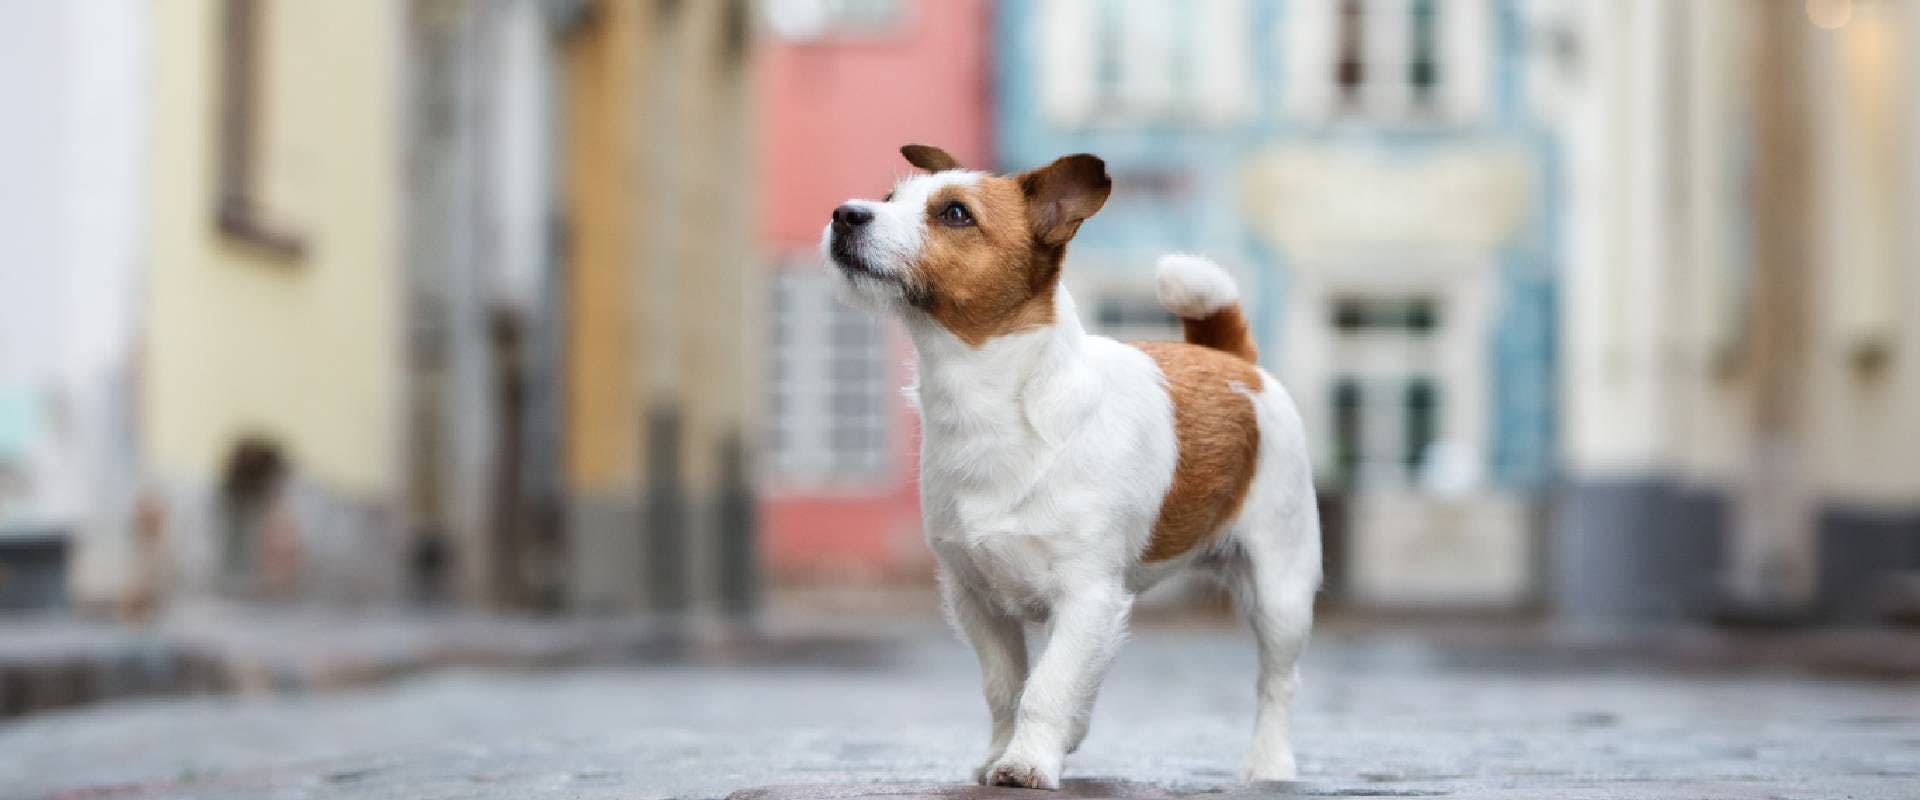 Jack Russell terrier dog walking in the city